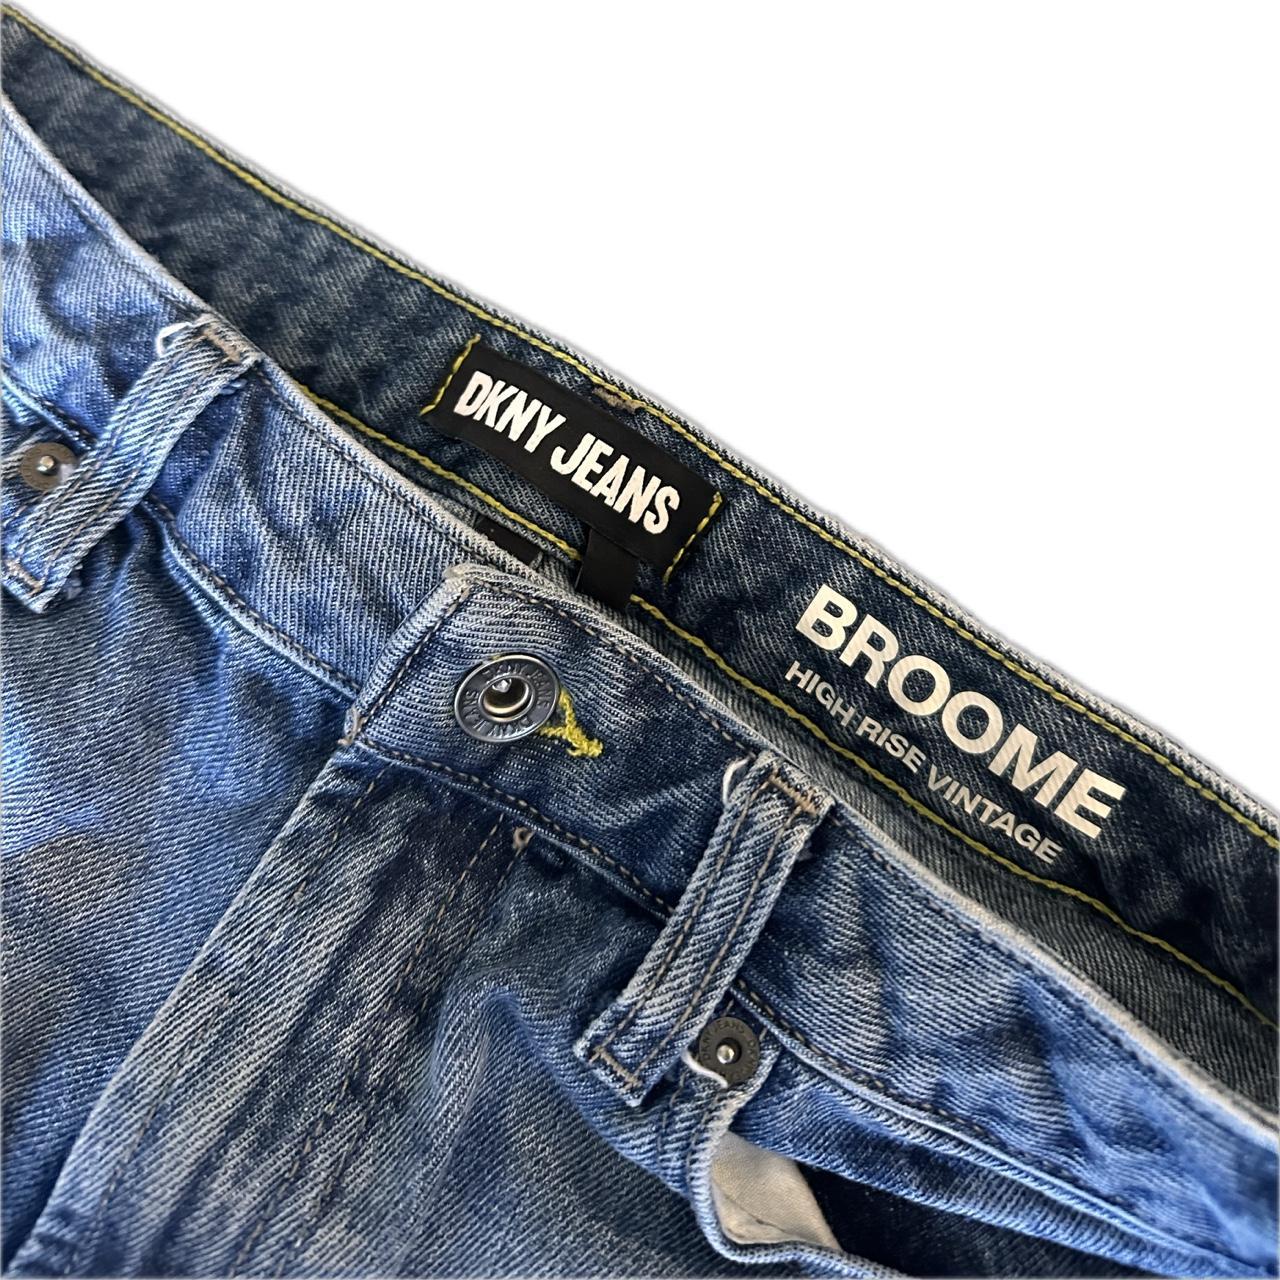 DKNY Jeans mid rise, 28/6 lightly worn, just not - Depop